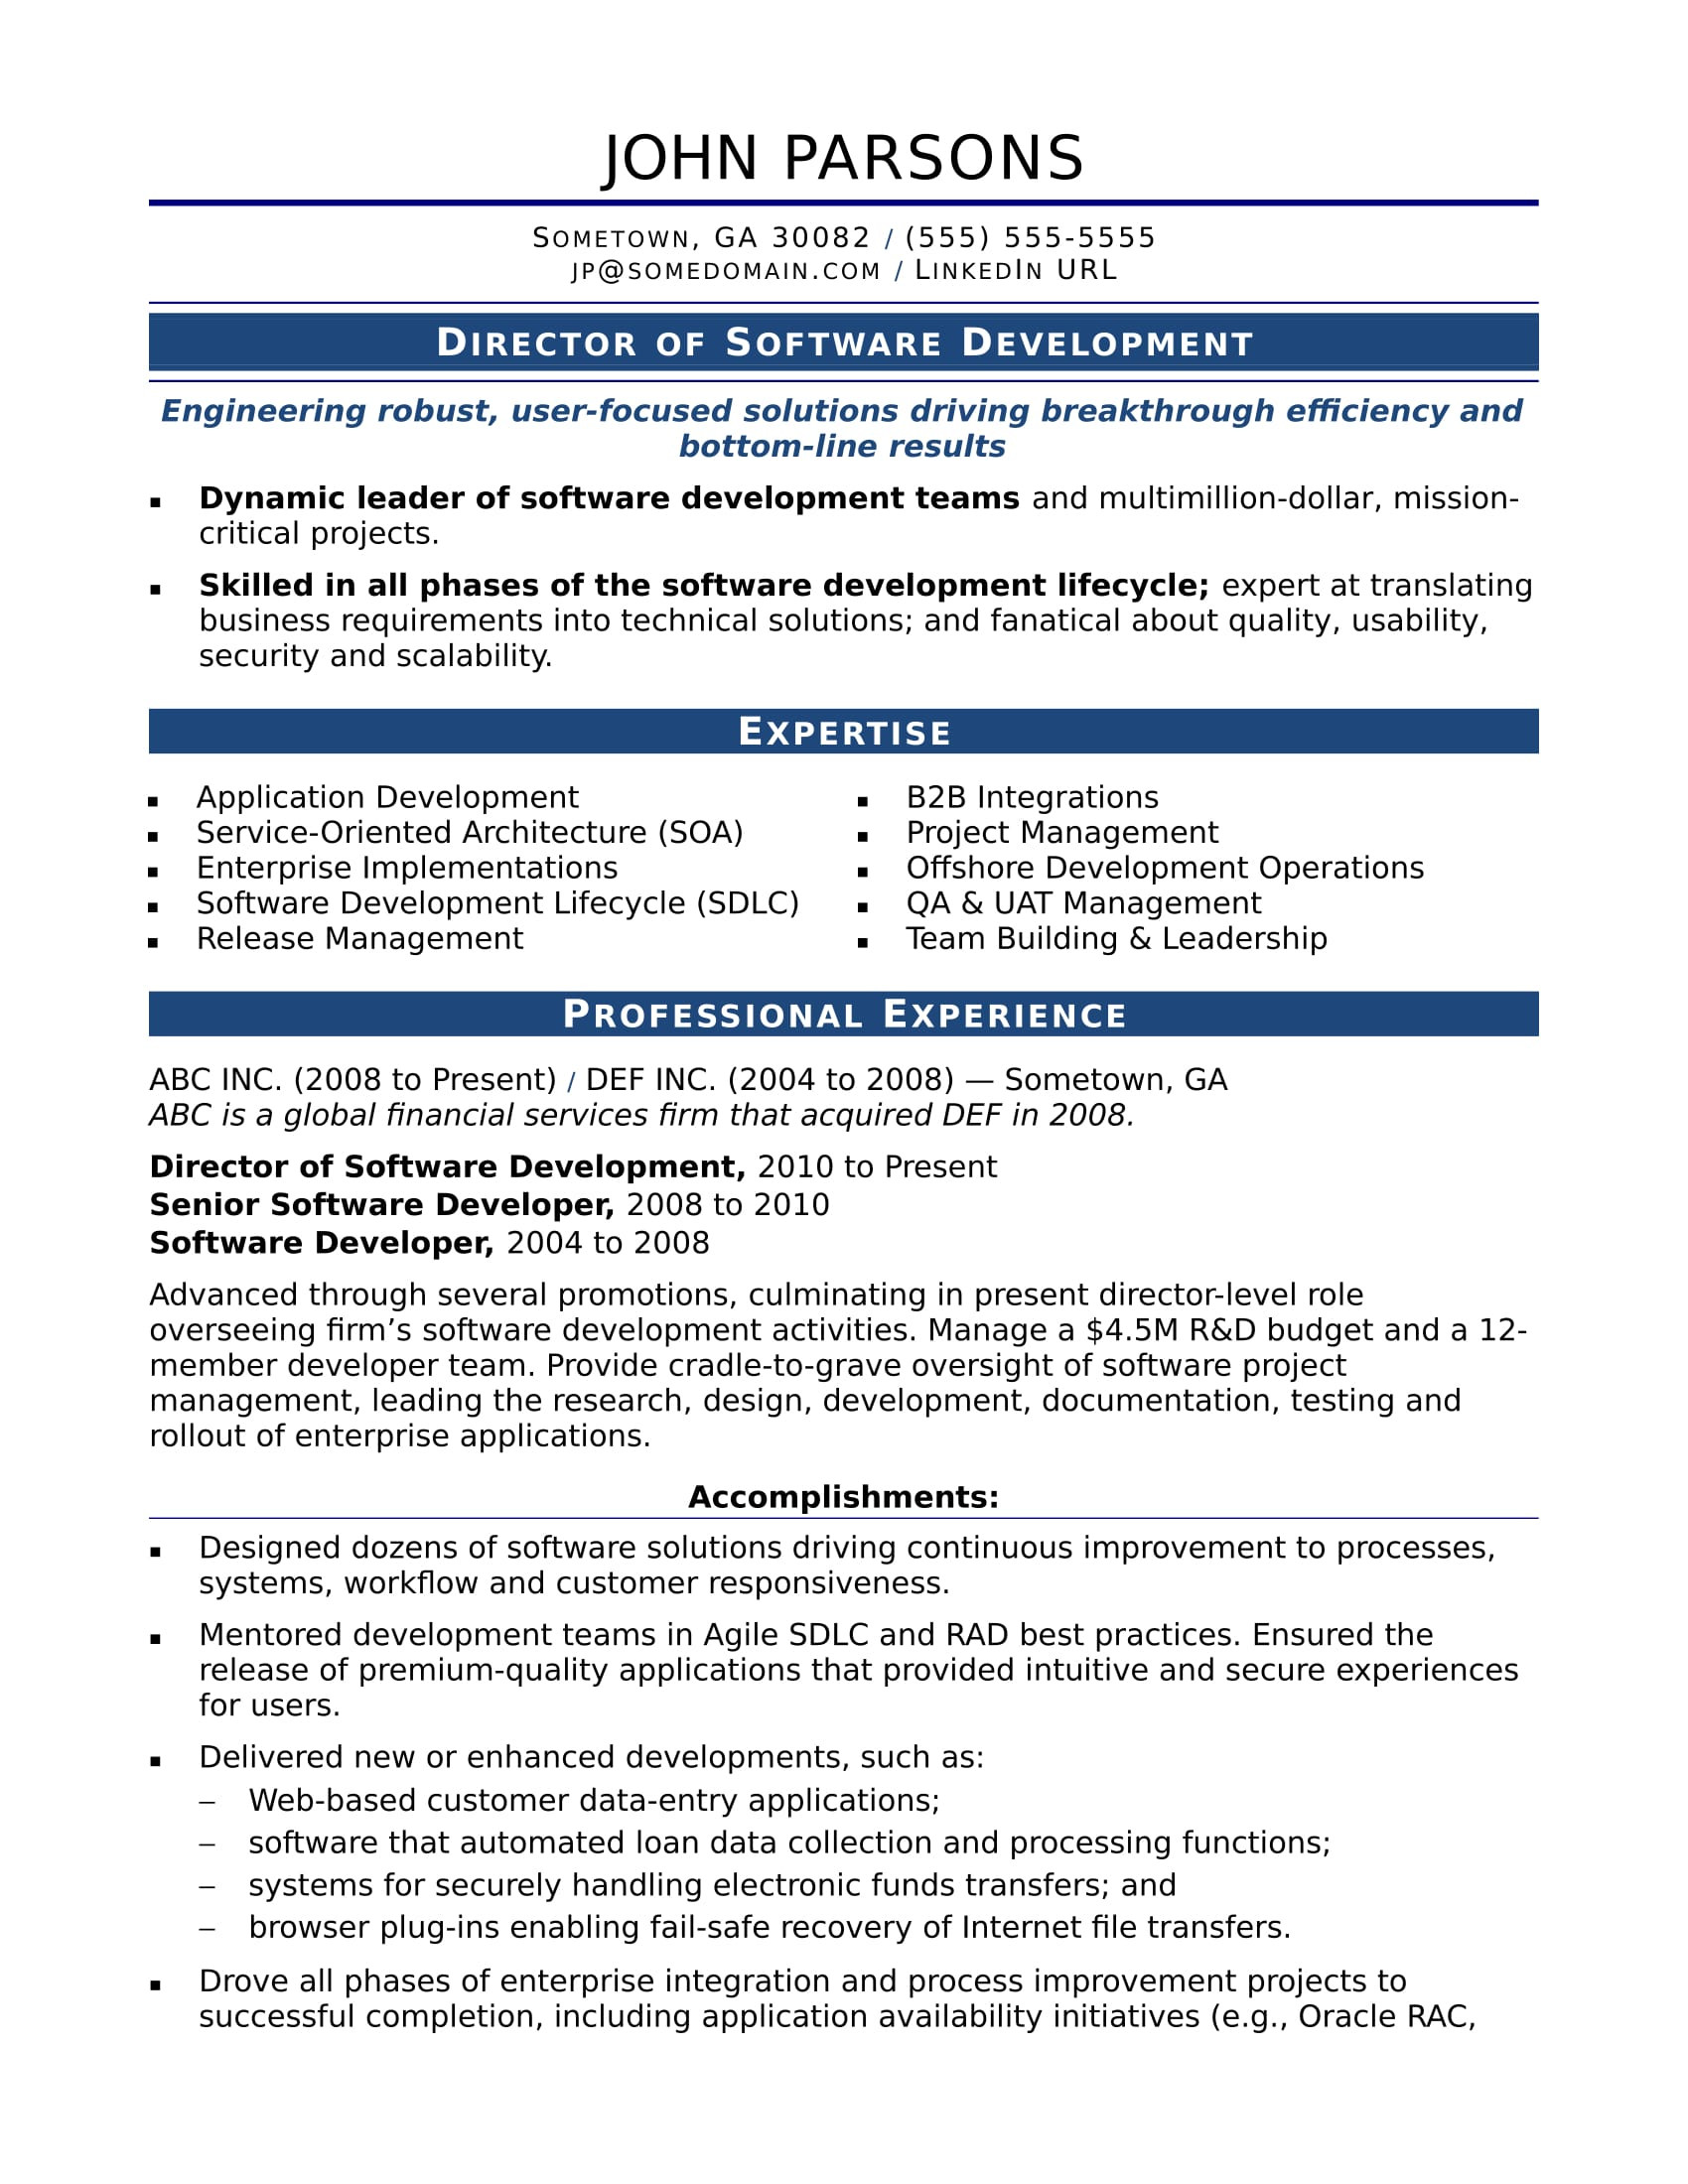 Websphere Application Server Experience Sample Resumes Doc format Sample Resume for An Experienced It Developer Monster.com